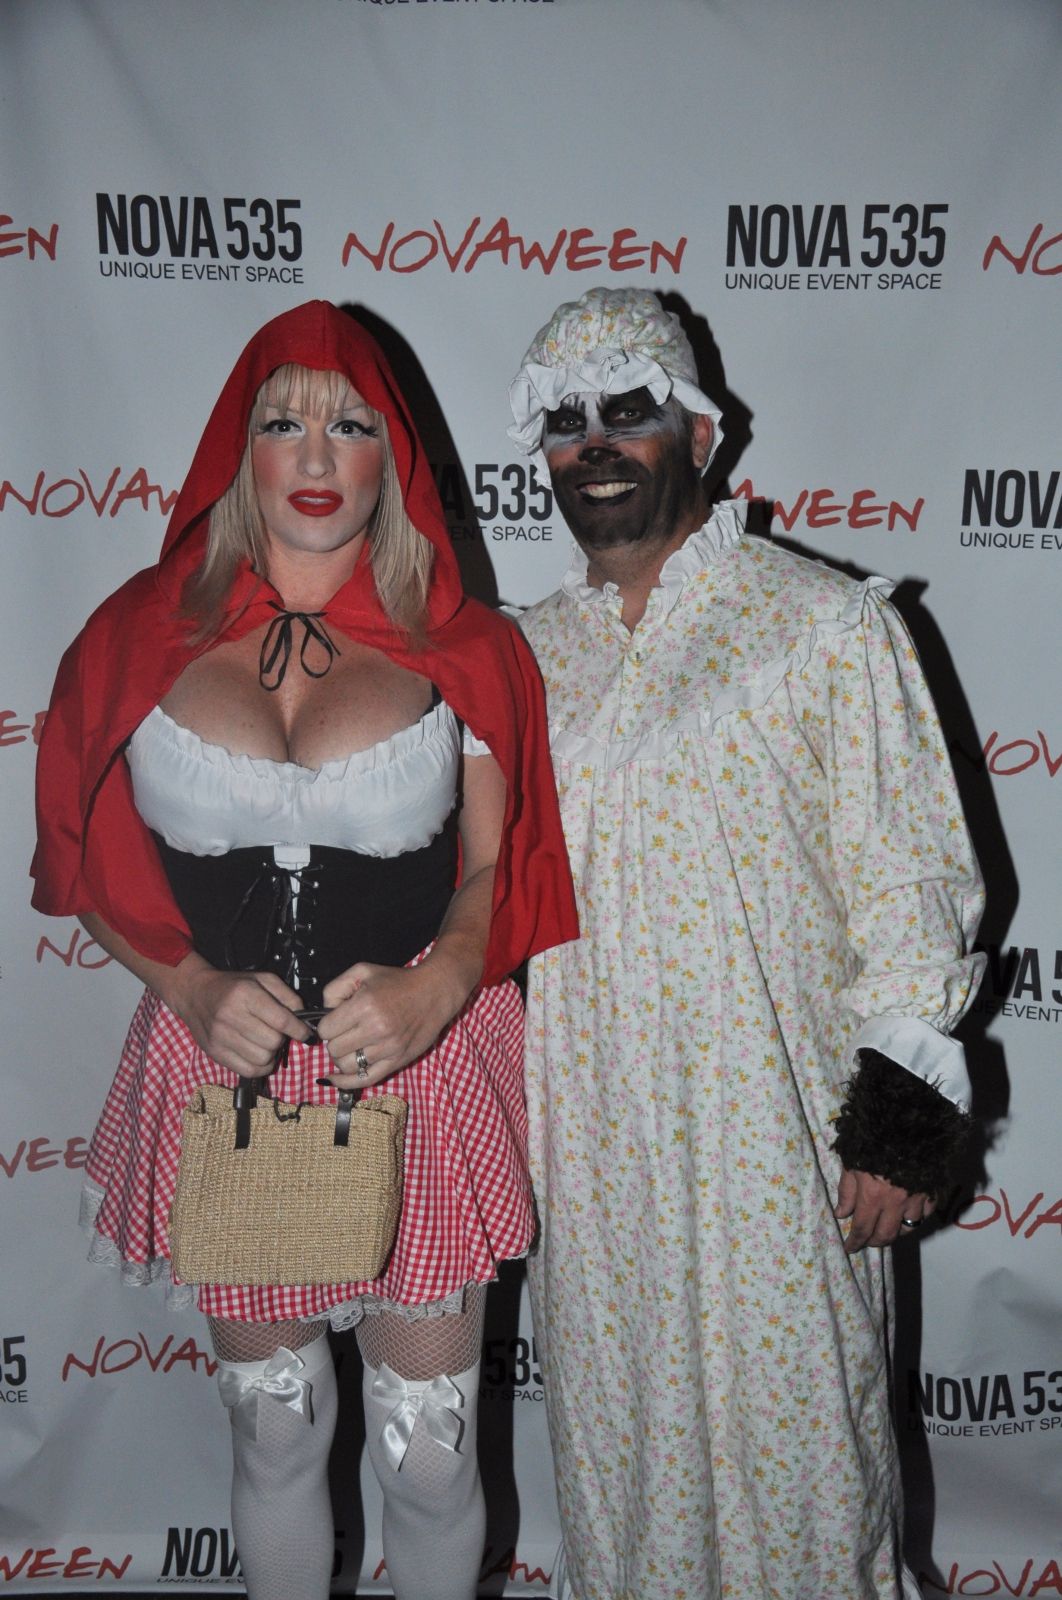 Our Friendly Freakshow Novaween He11even ensured we all celebrated 11 years of Downtown St. Pete's favorite Halloween Party Novaween on October 20, 2017 at historic DTSP venue NOVA 535